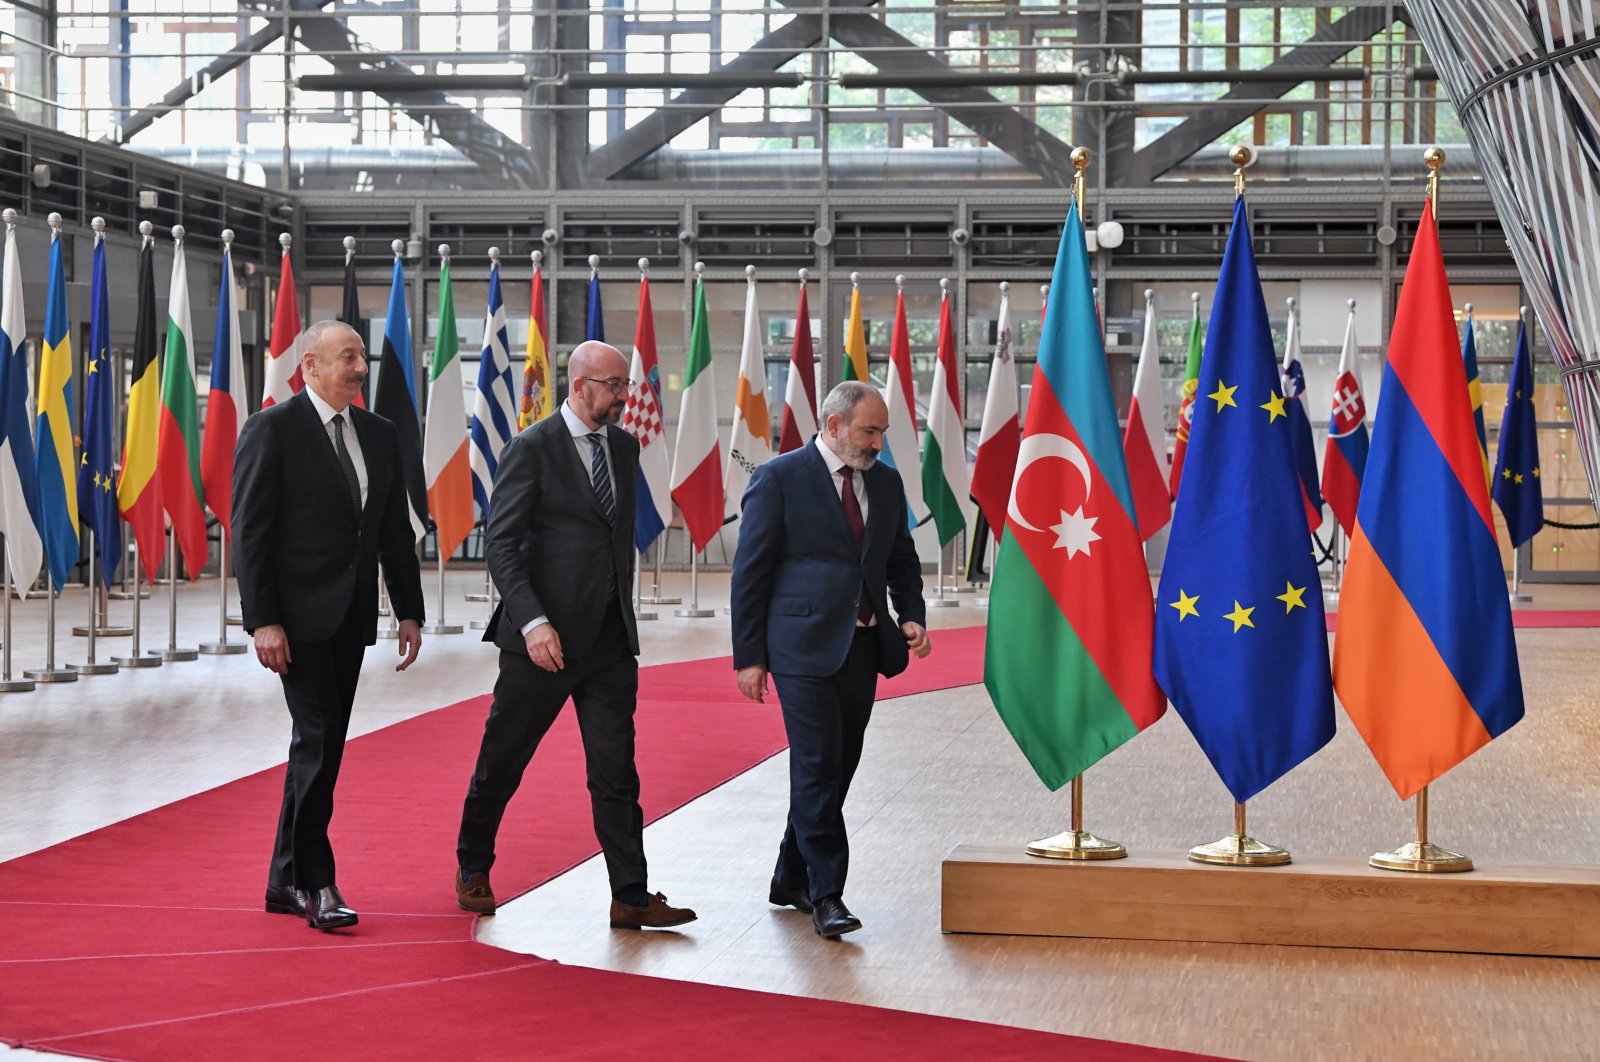 European Council Head Charles Michel is seen with Azerbaijani President Ilham Aliyev and Armenian Prime Minister Nikol Pashinyan in Brussels, Belgium, May 23, 2021 (AA Photo)